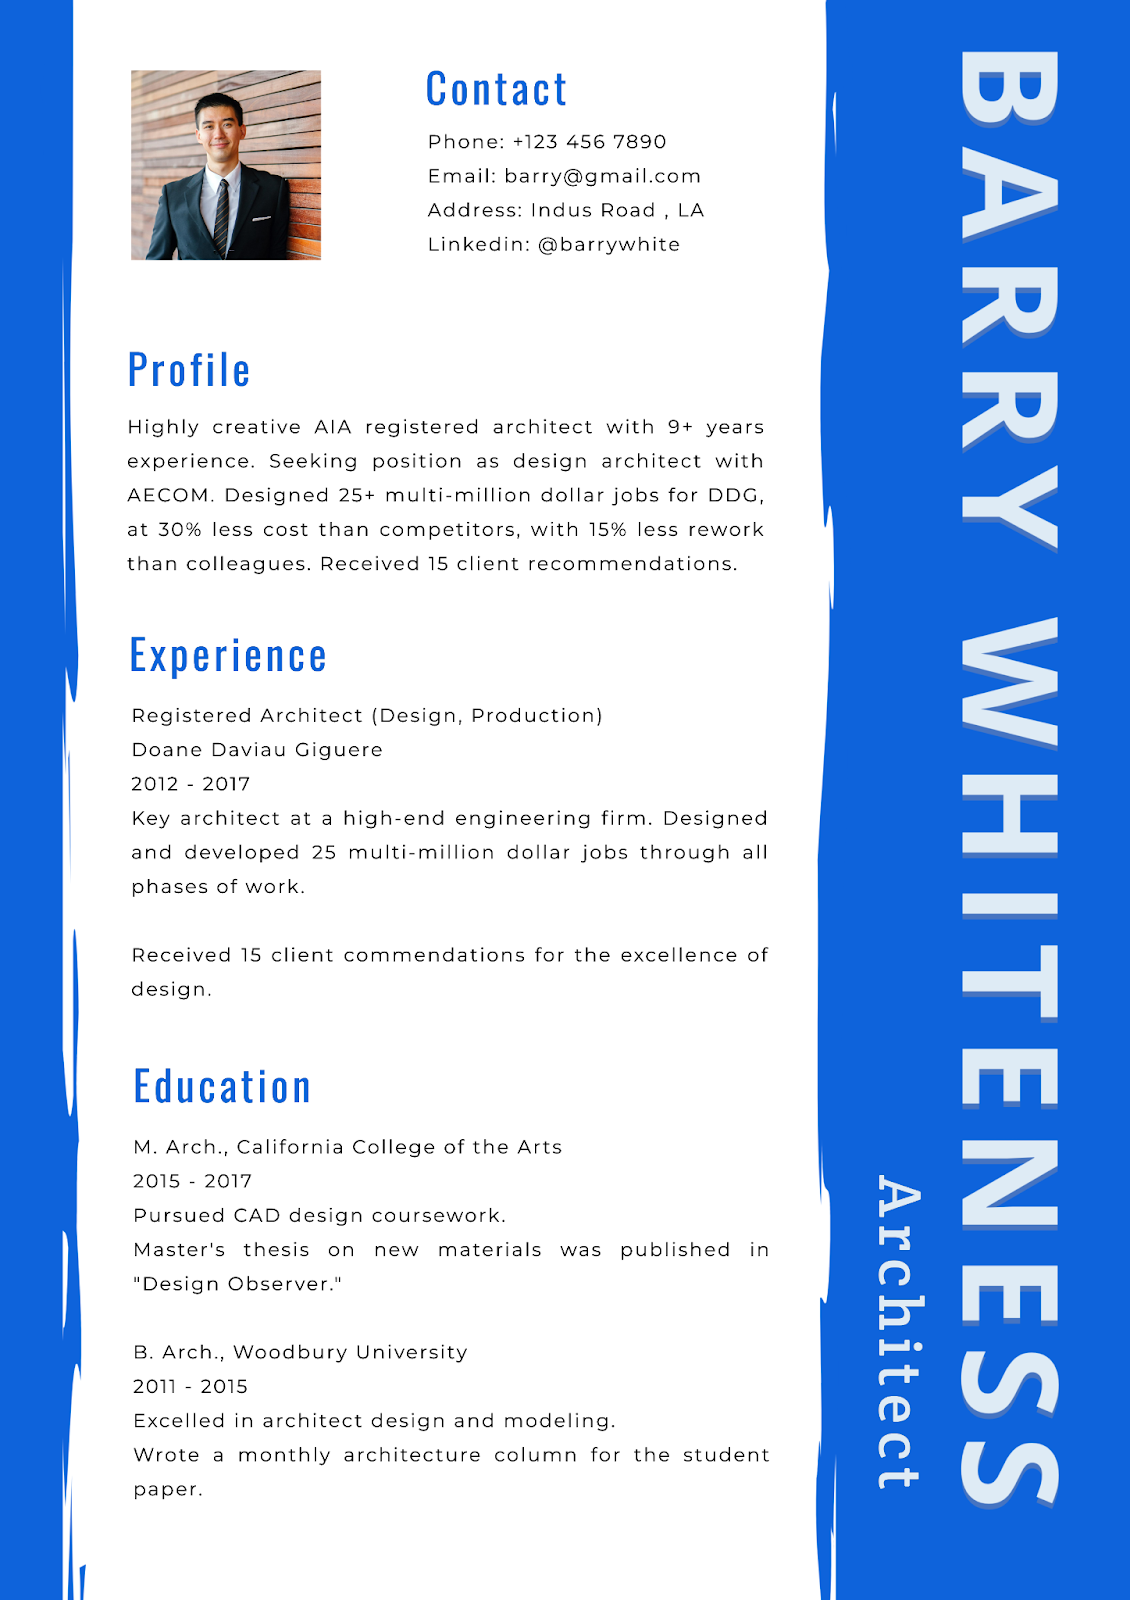 Architect Resume Template by DocHipo